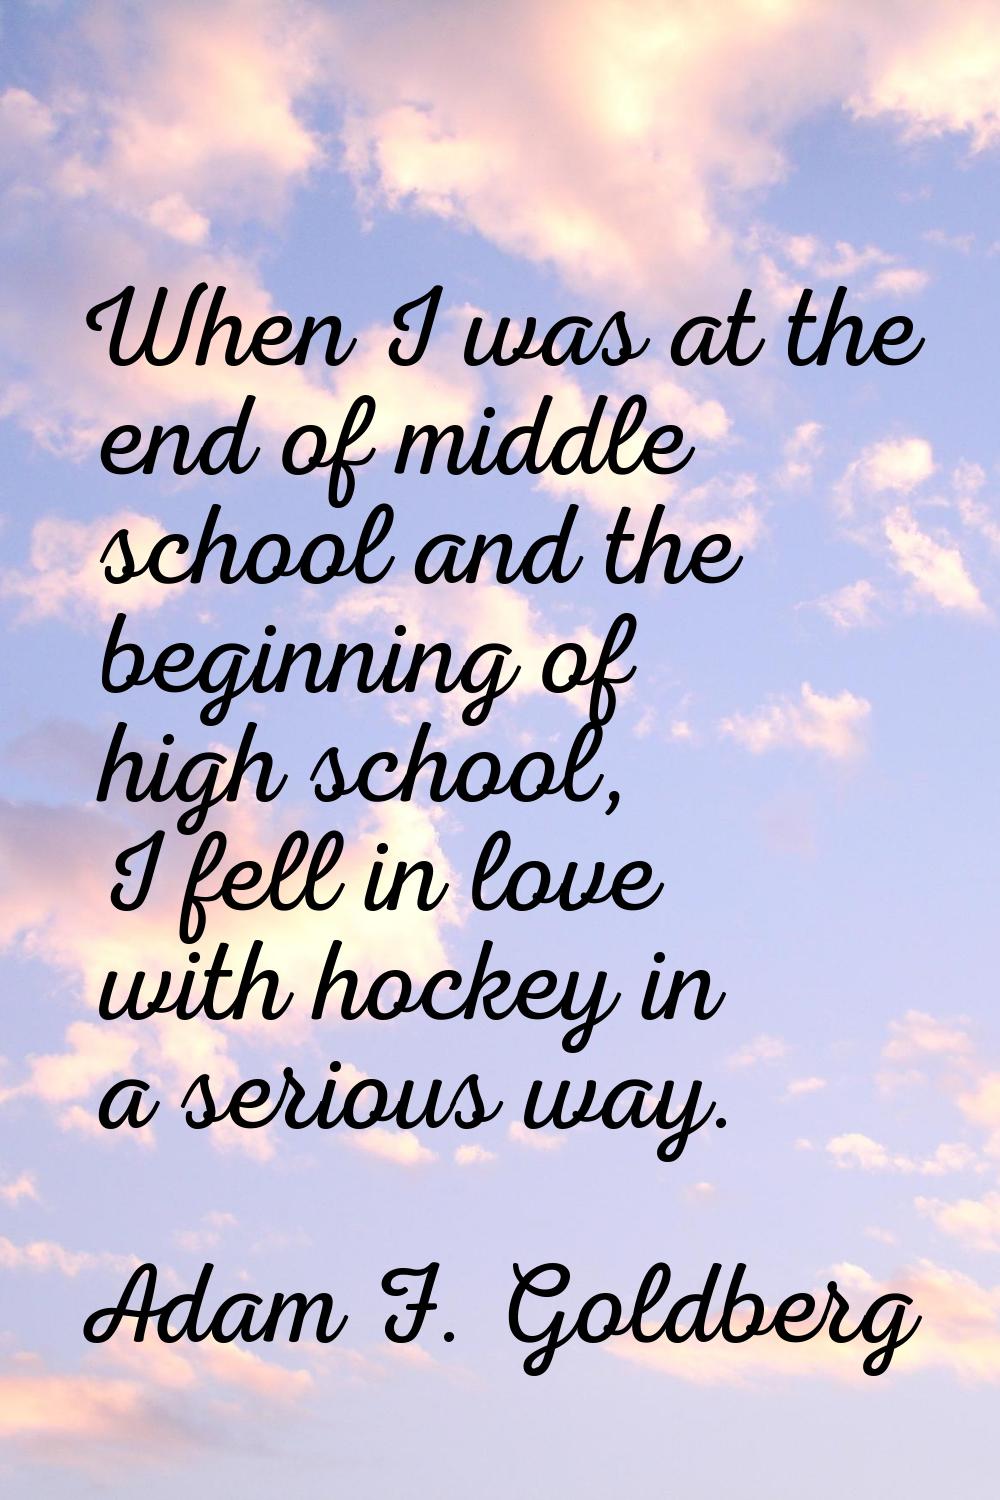 When I was at the end of middle school and the beginning of high school, I fell in love with hockey